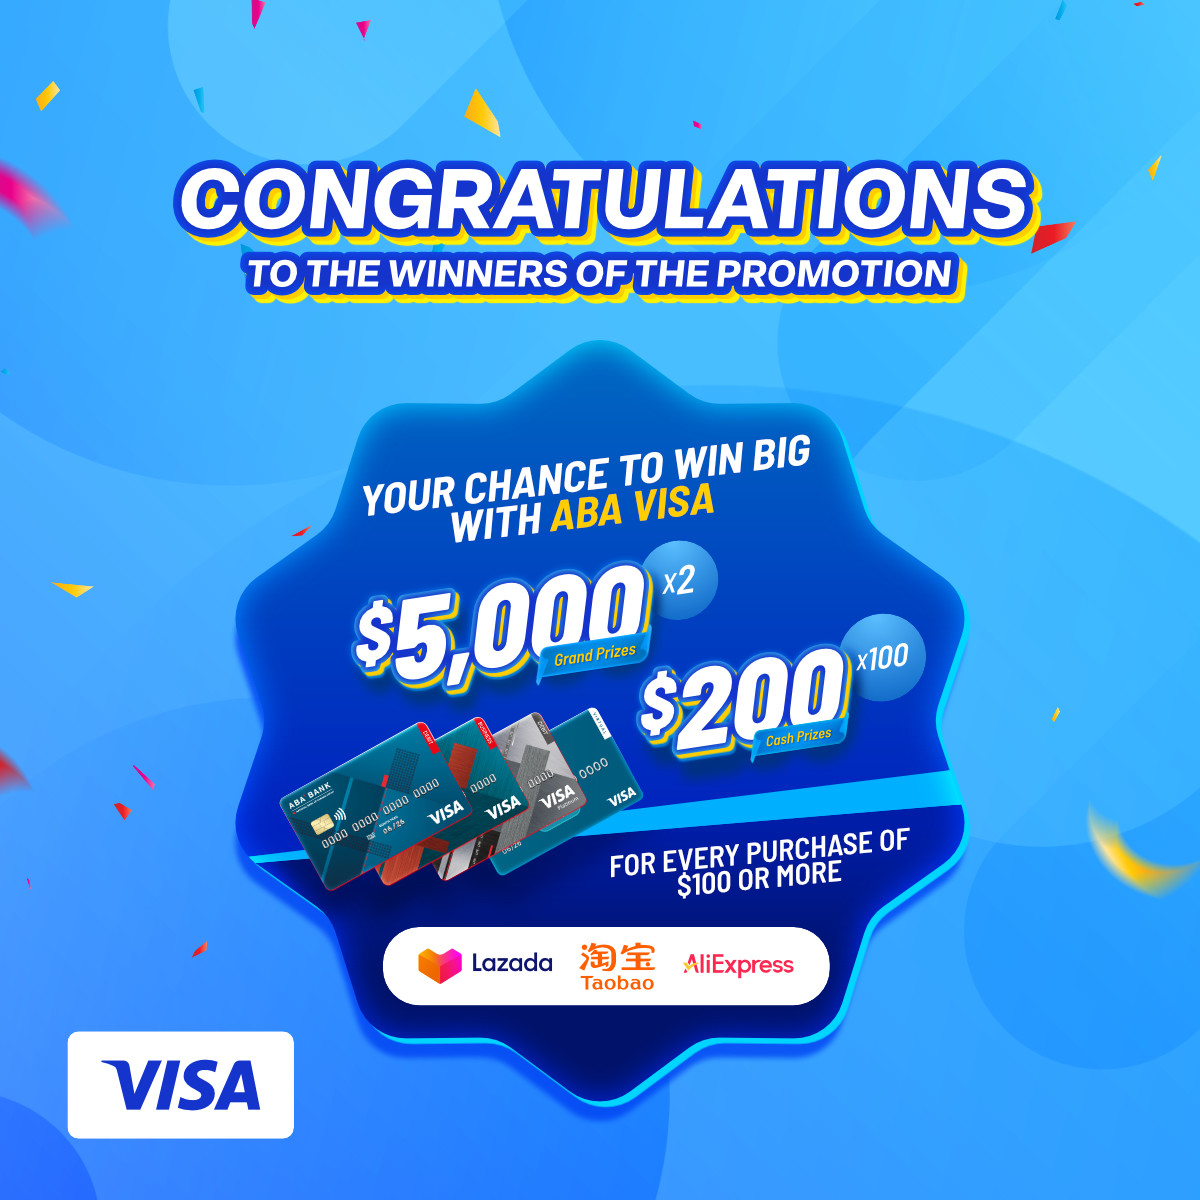 Congratulations​ to​ the​ first​ round​ of​ winners​ of​ the​ “Win​ up​ to​ $5,000​ from​ online​ shopping​ experience​ with​ the​ ABA​ Visa​ Card”​ Promotion”!​